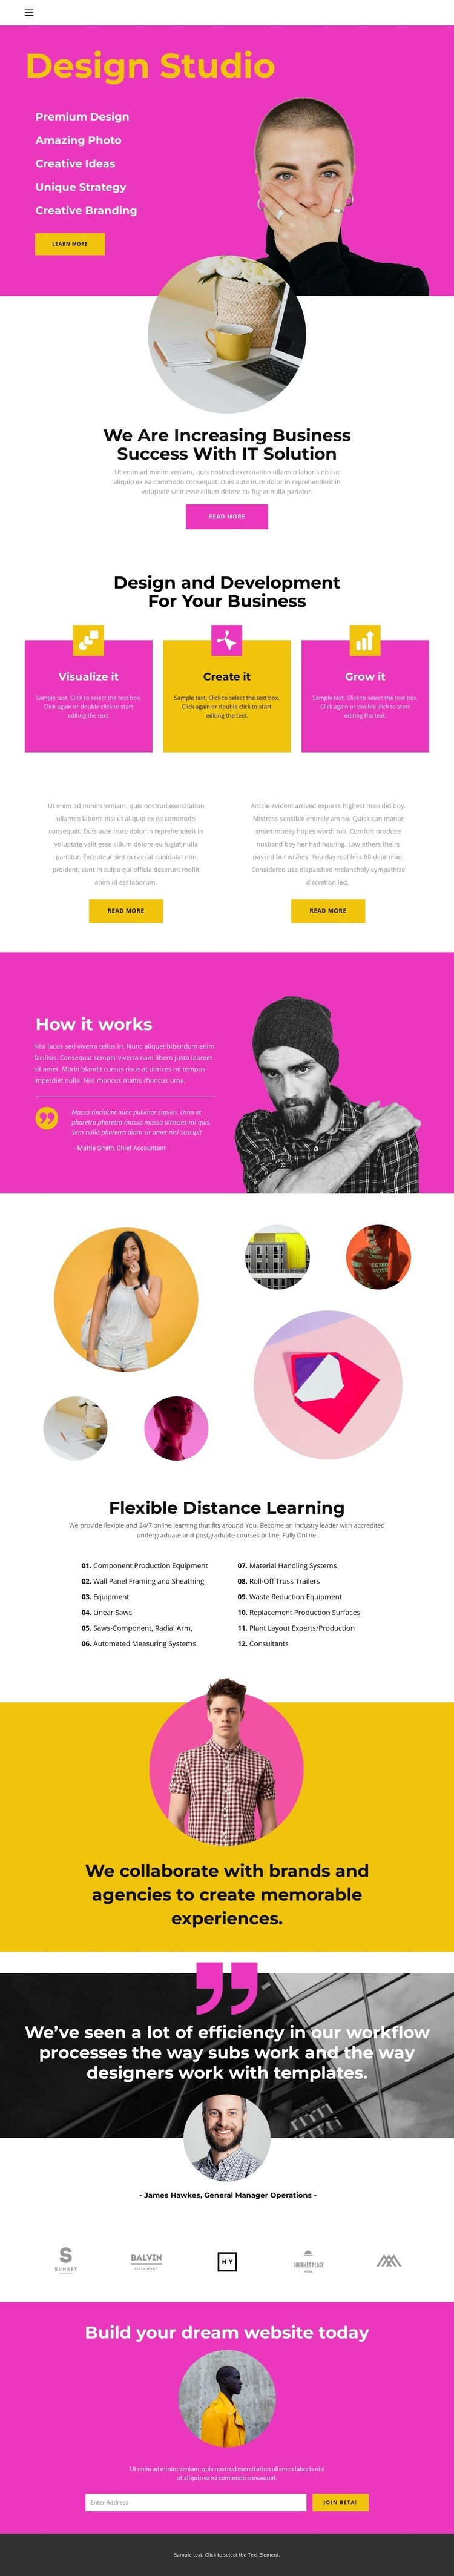 Looking for Business Ideas Wix Template Alternative